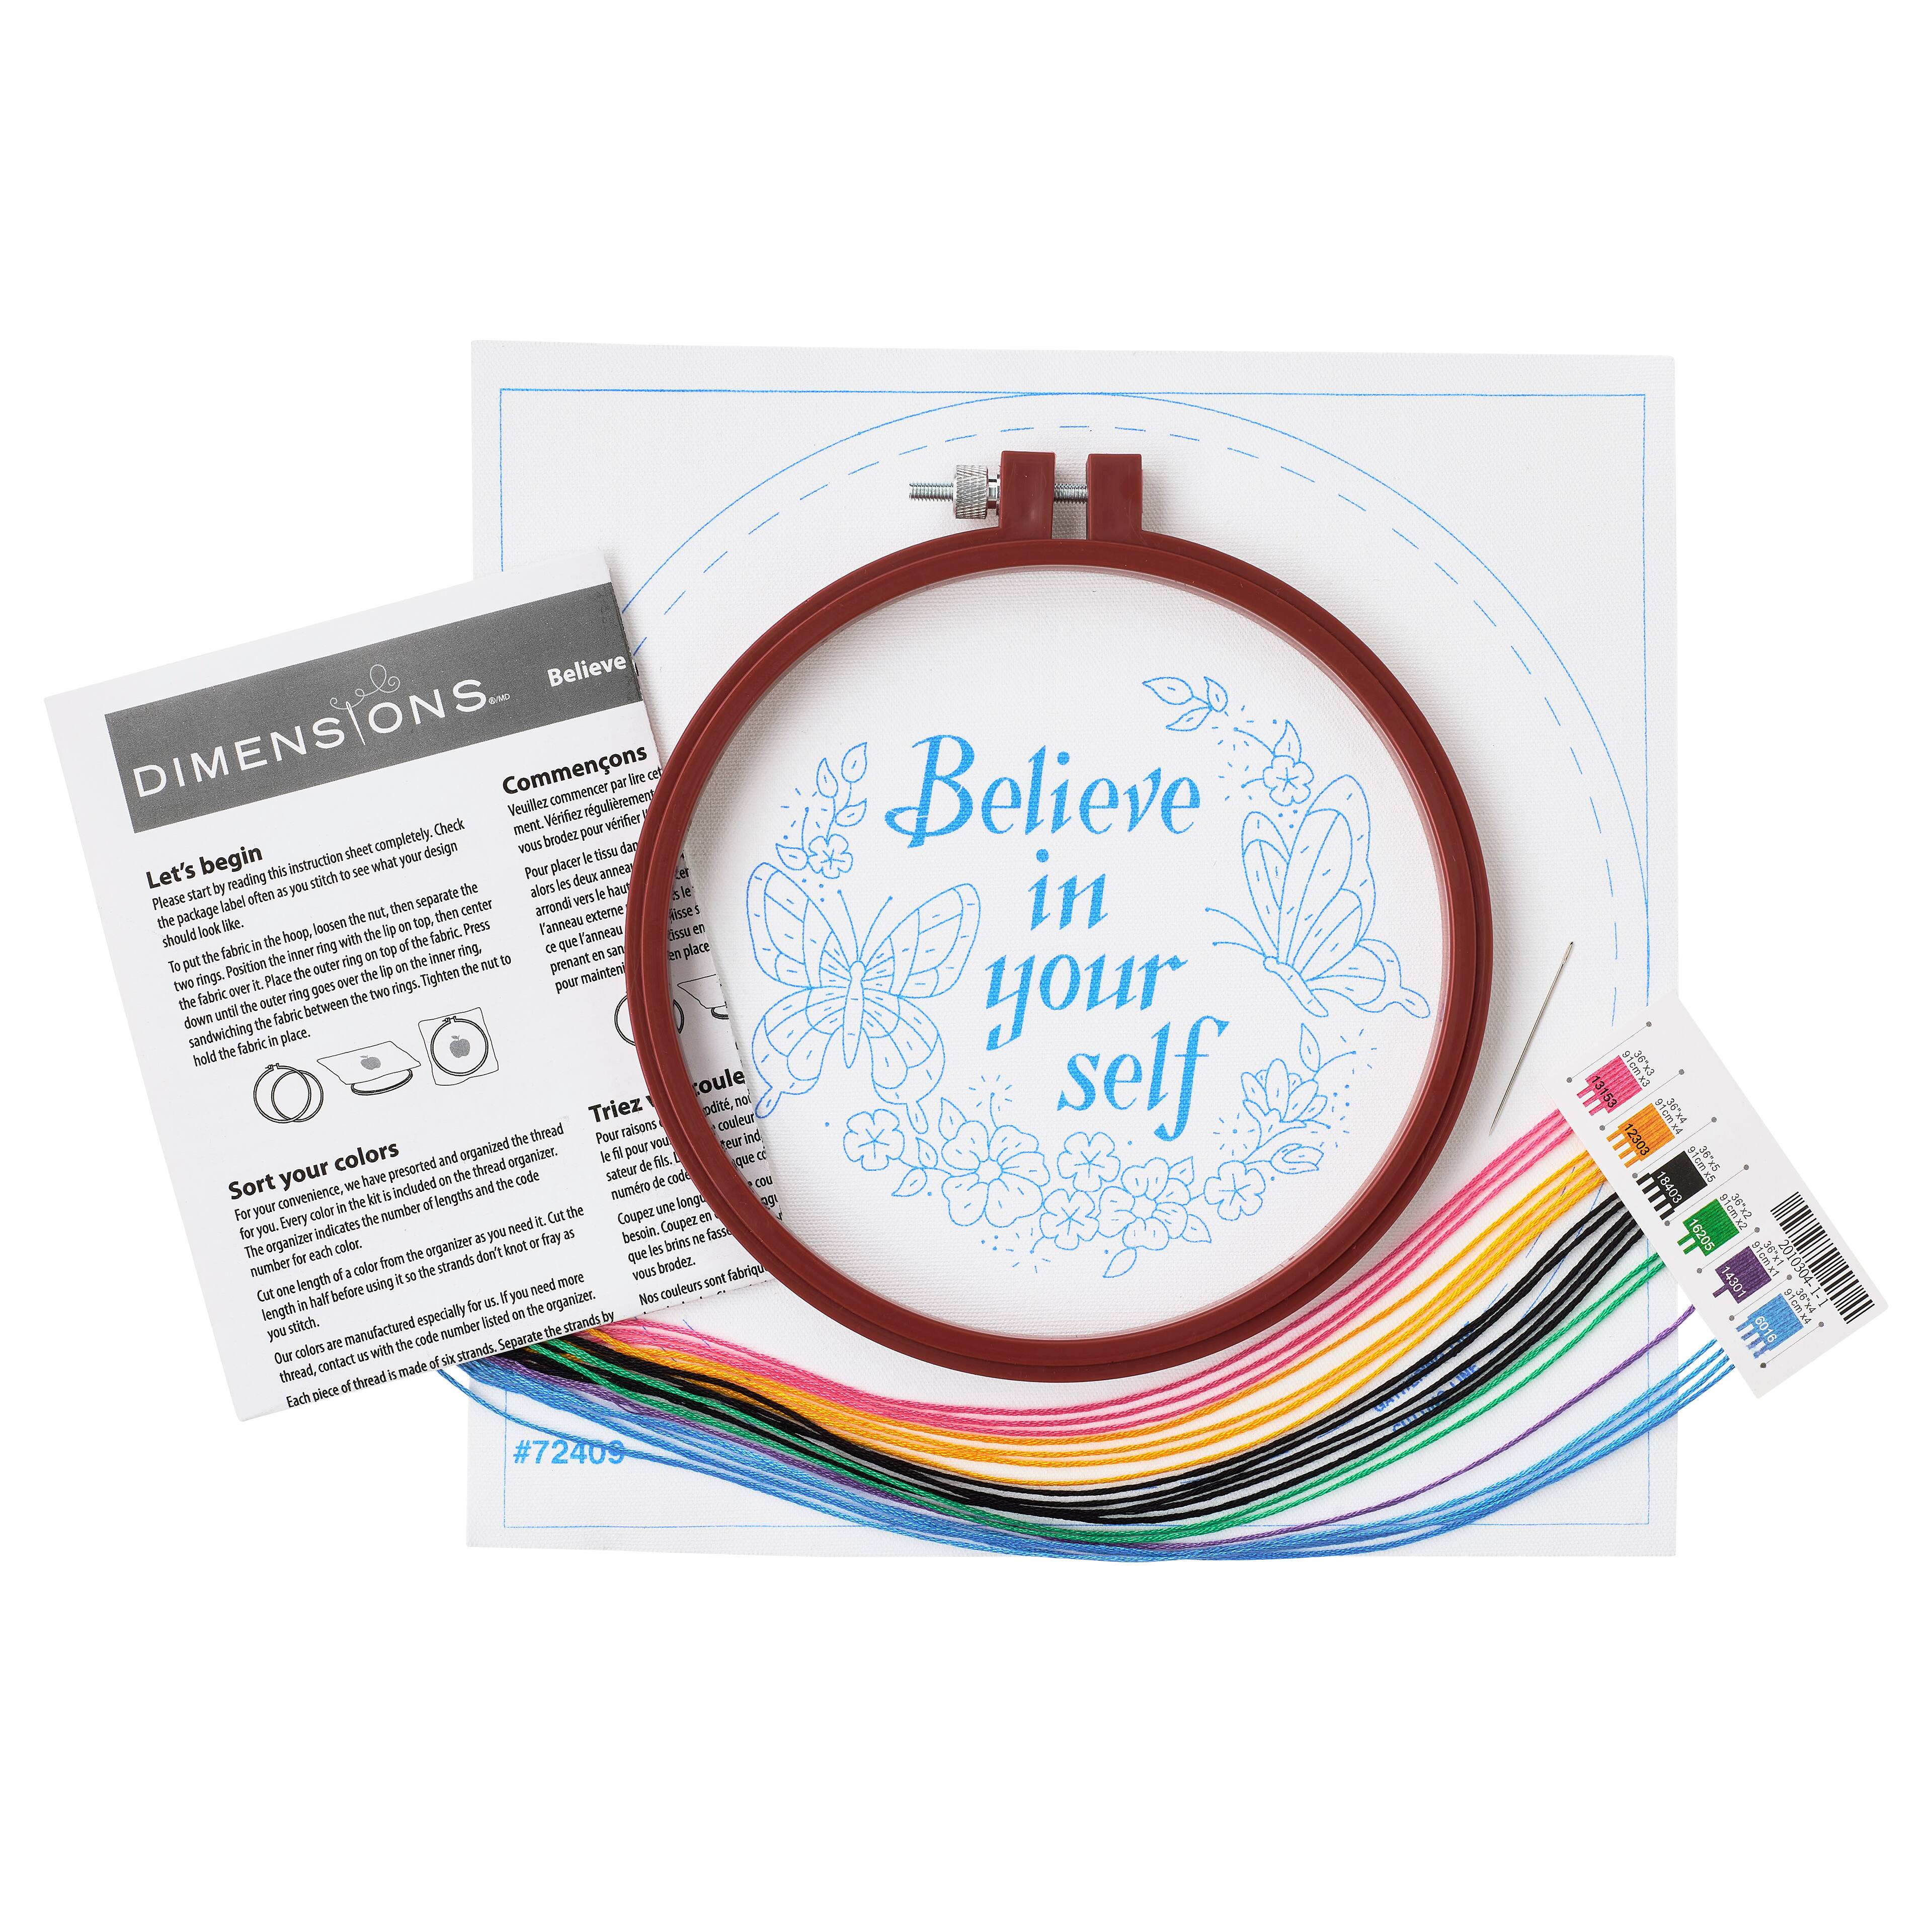 Dimensions® Believe in Yourself Crewel Embroidery Kit | Michaels